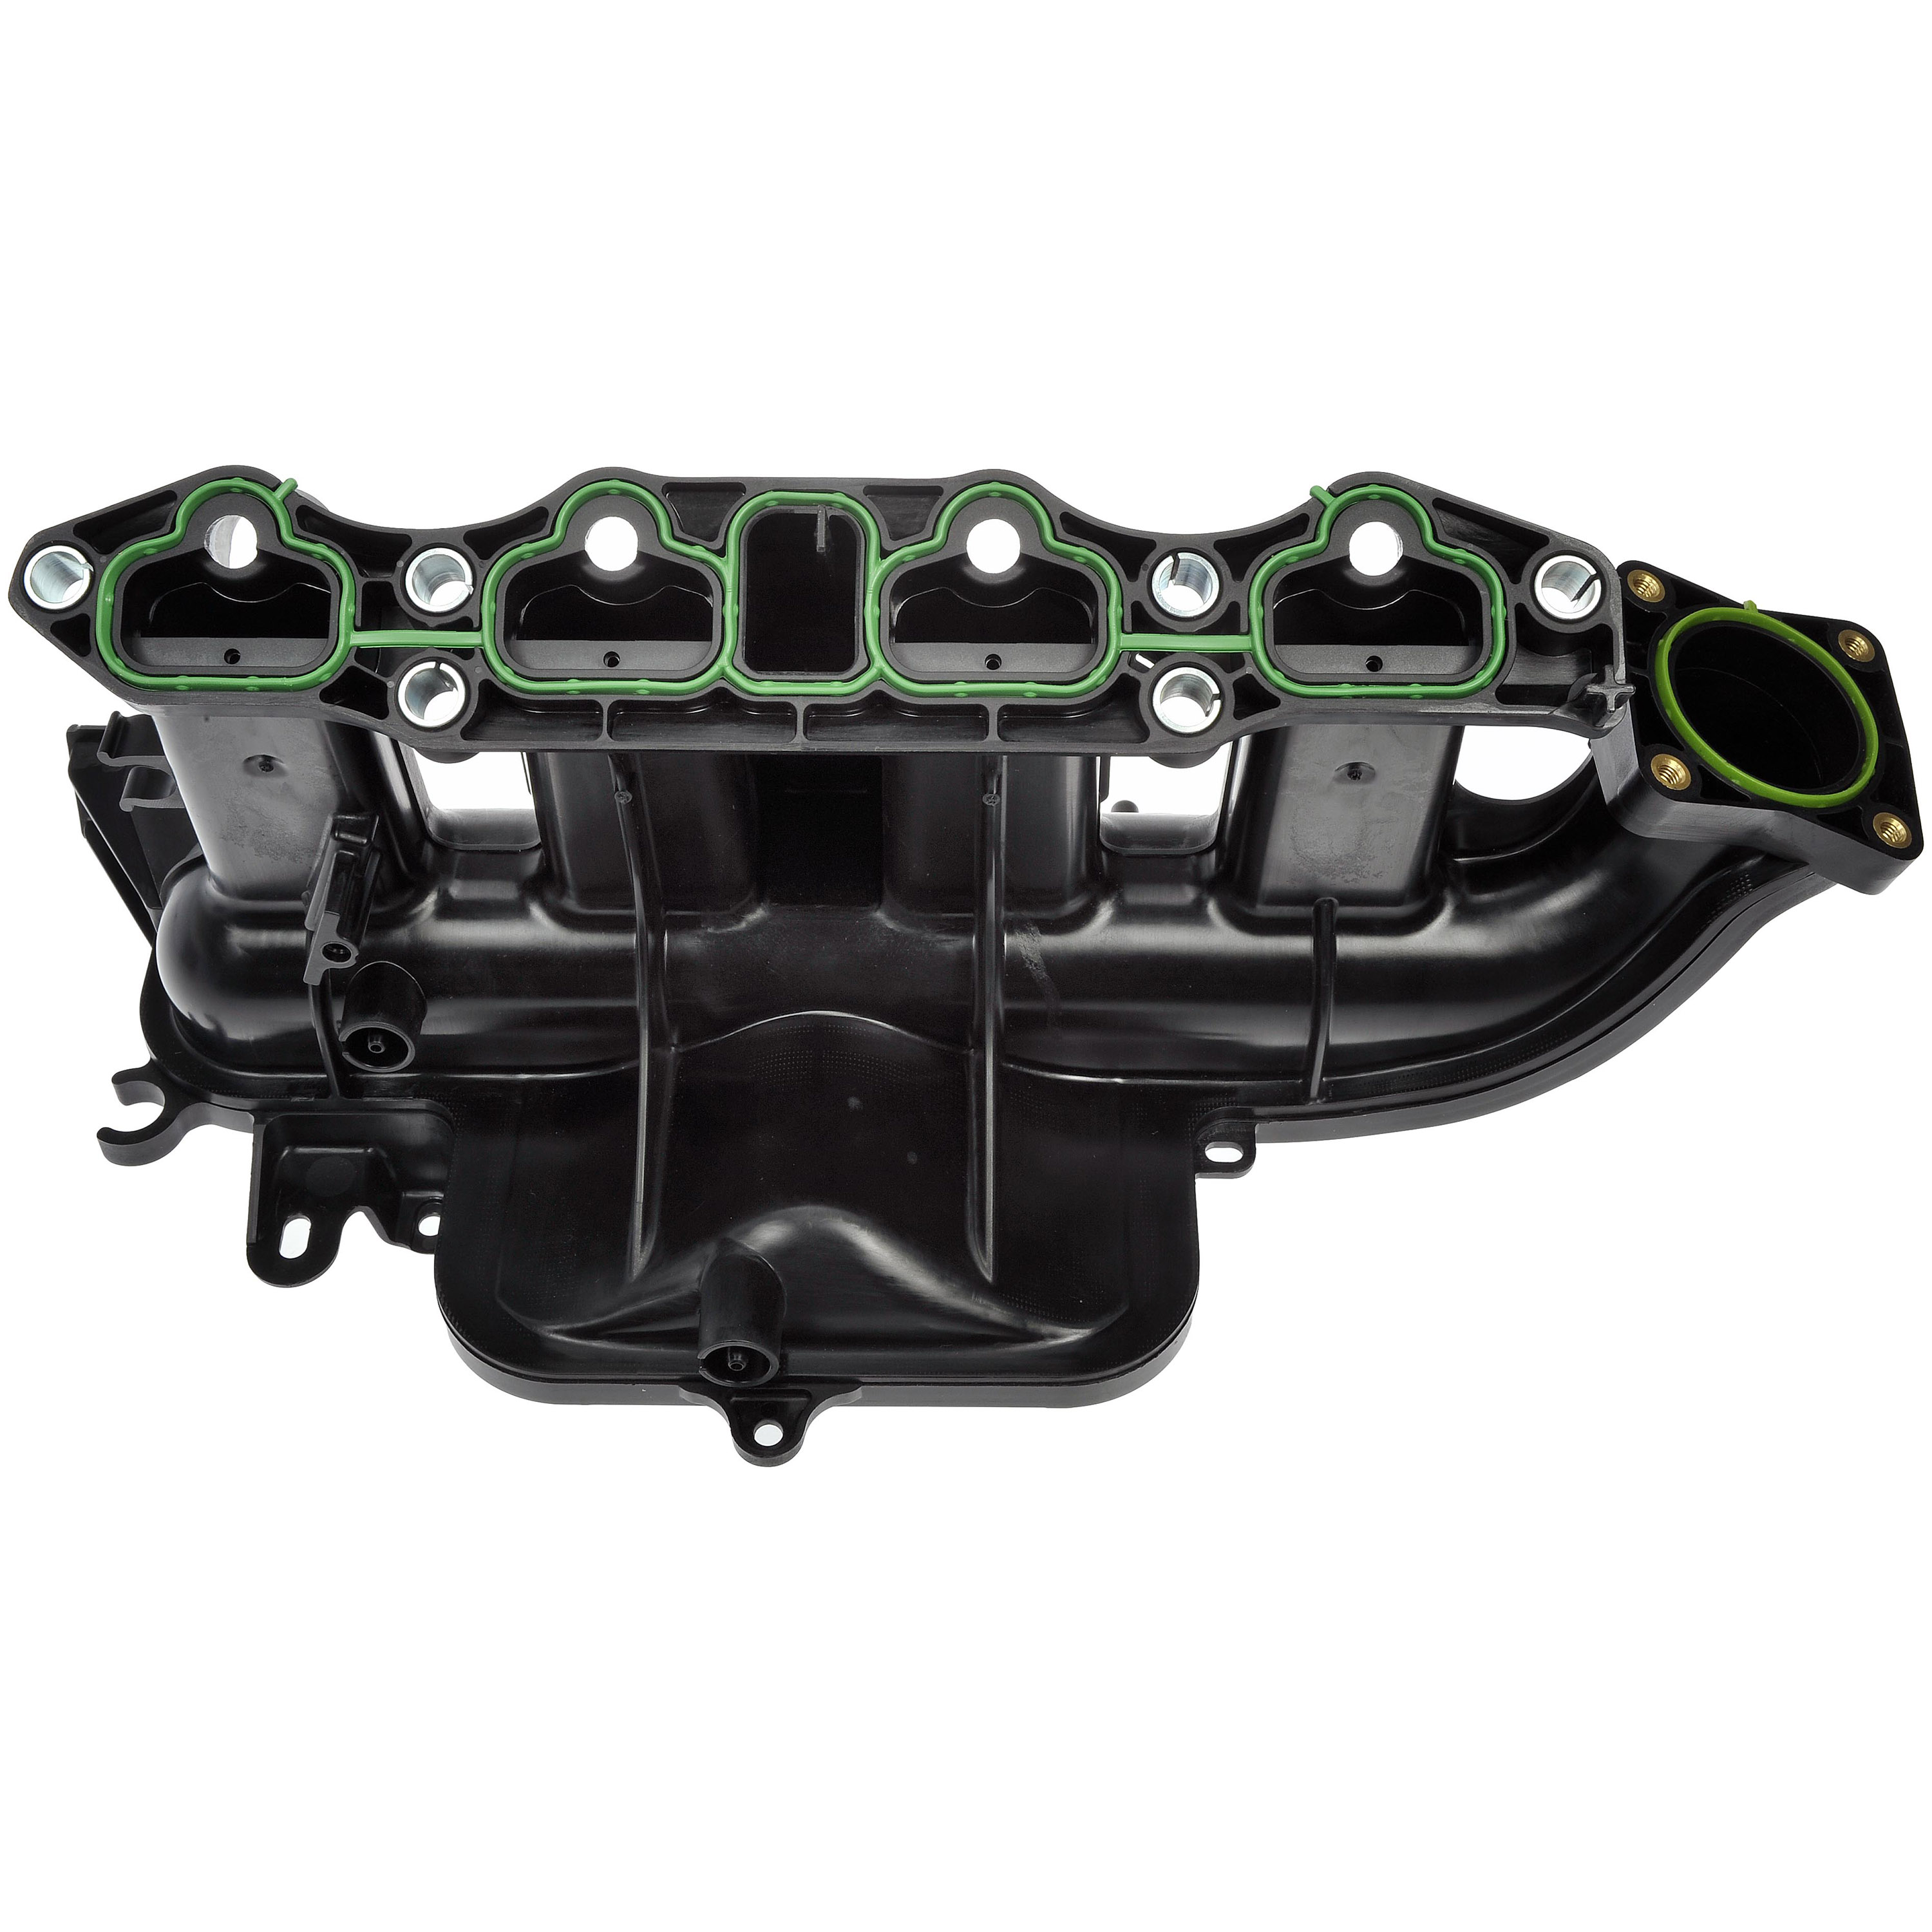 Dorman 615-380 Engine Intake Manifold for Select Buick/Chevrolet Models (OE  FIX) Fits select: 2012-2019 CHEVROLET CRUZE, 2015-2022 CHEVROLET TRAX 